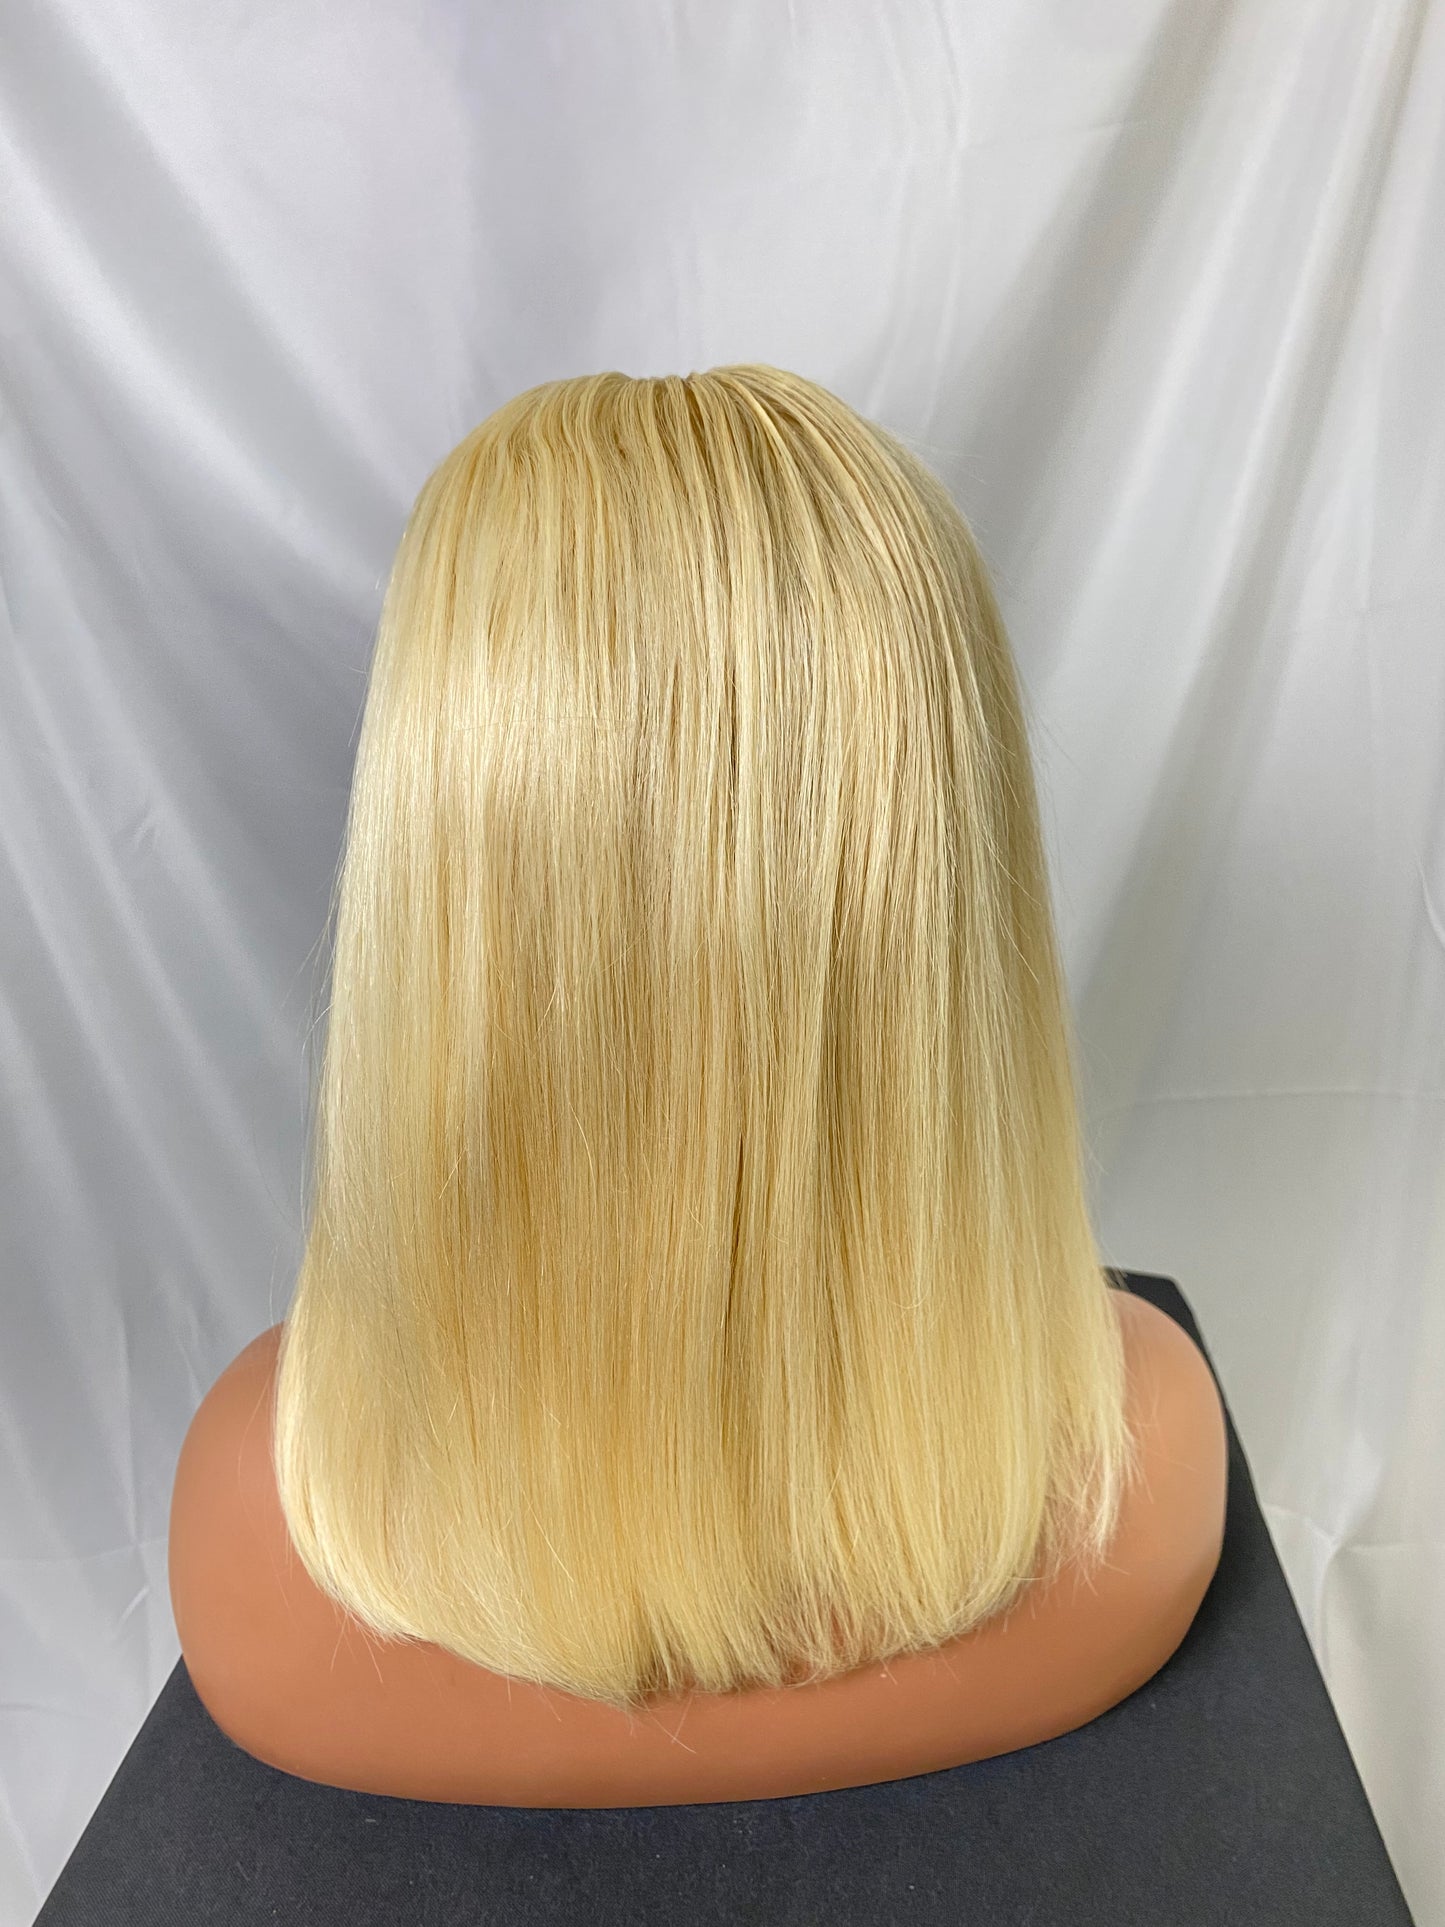 13 X 4 FRONTAL 14 INCH BLONDE WIG